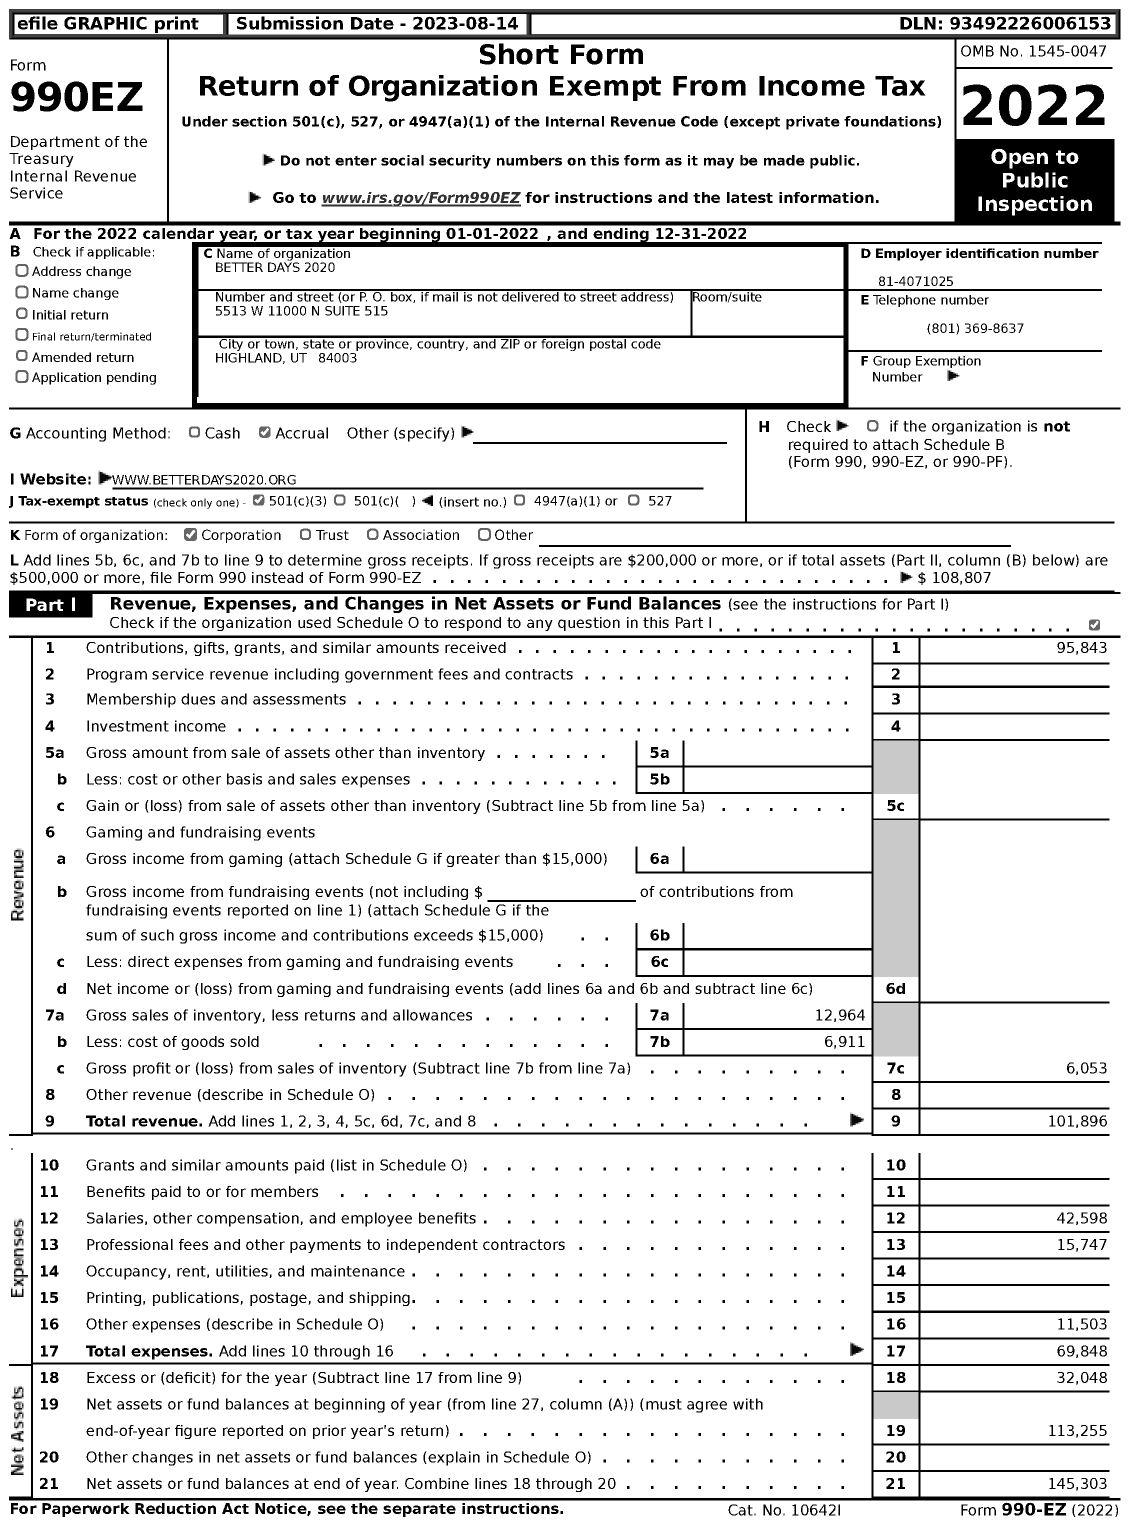 Image of first page of 2022 Form 990EZ for Better Days 2020